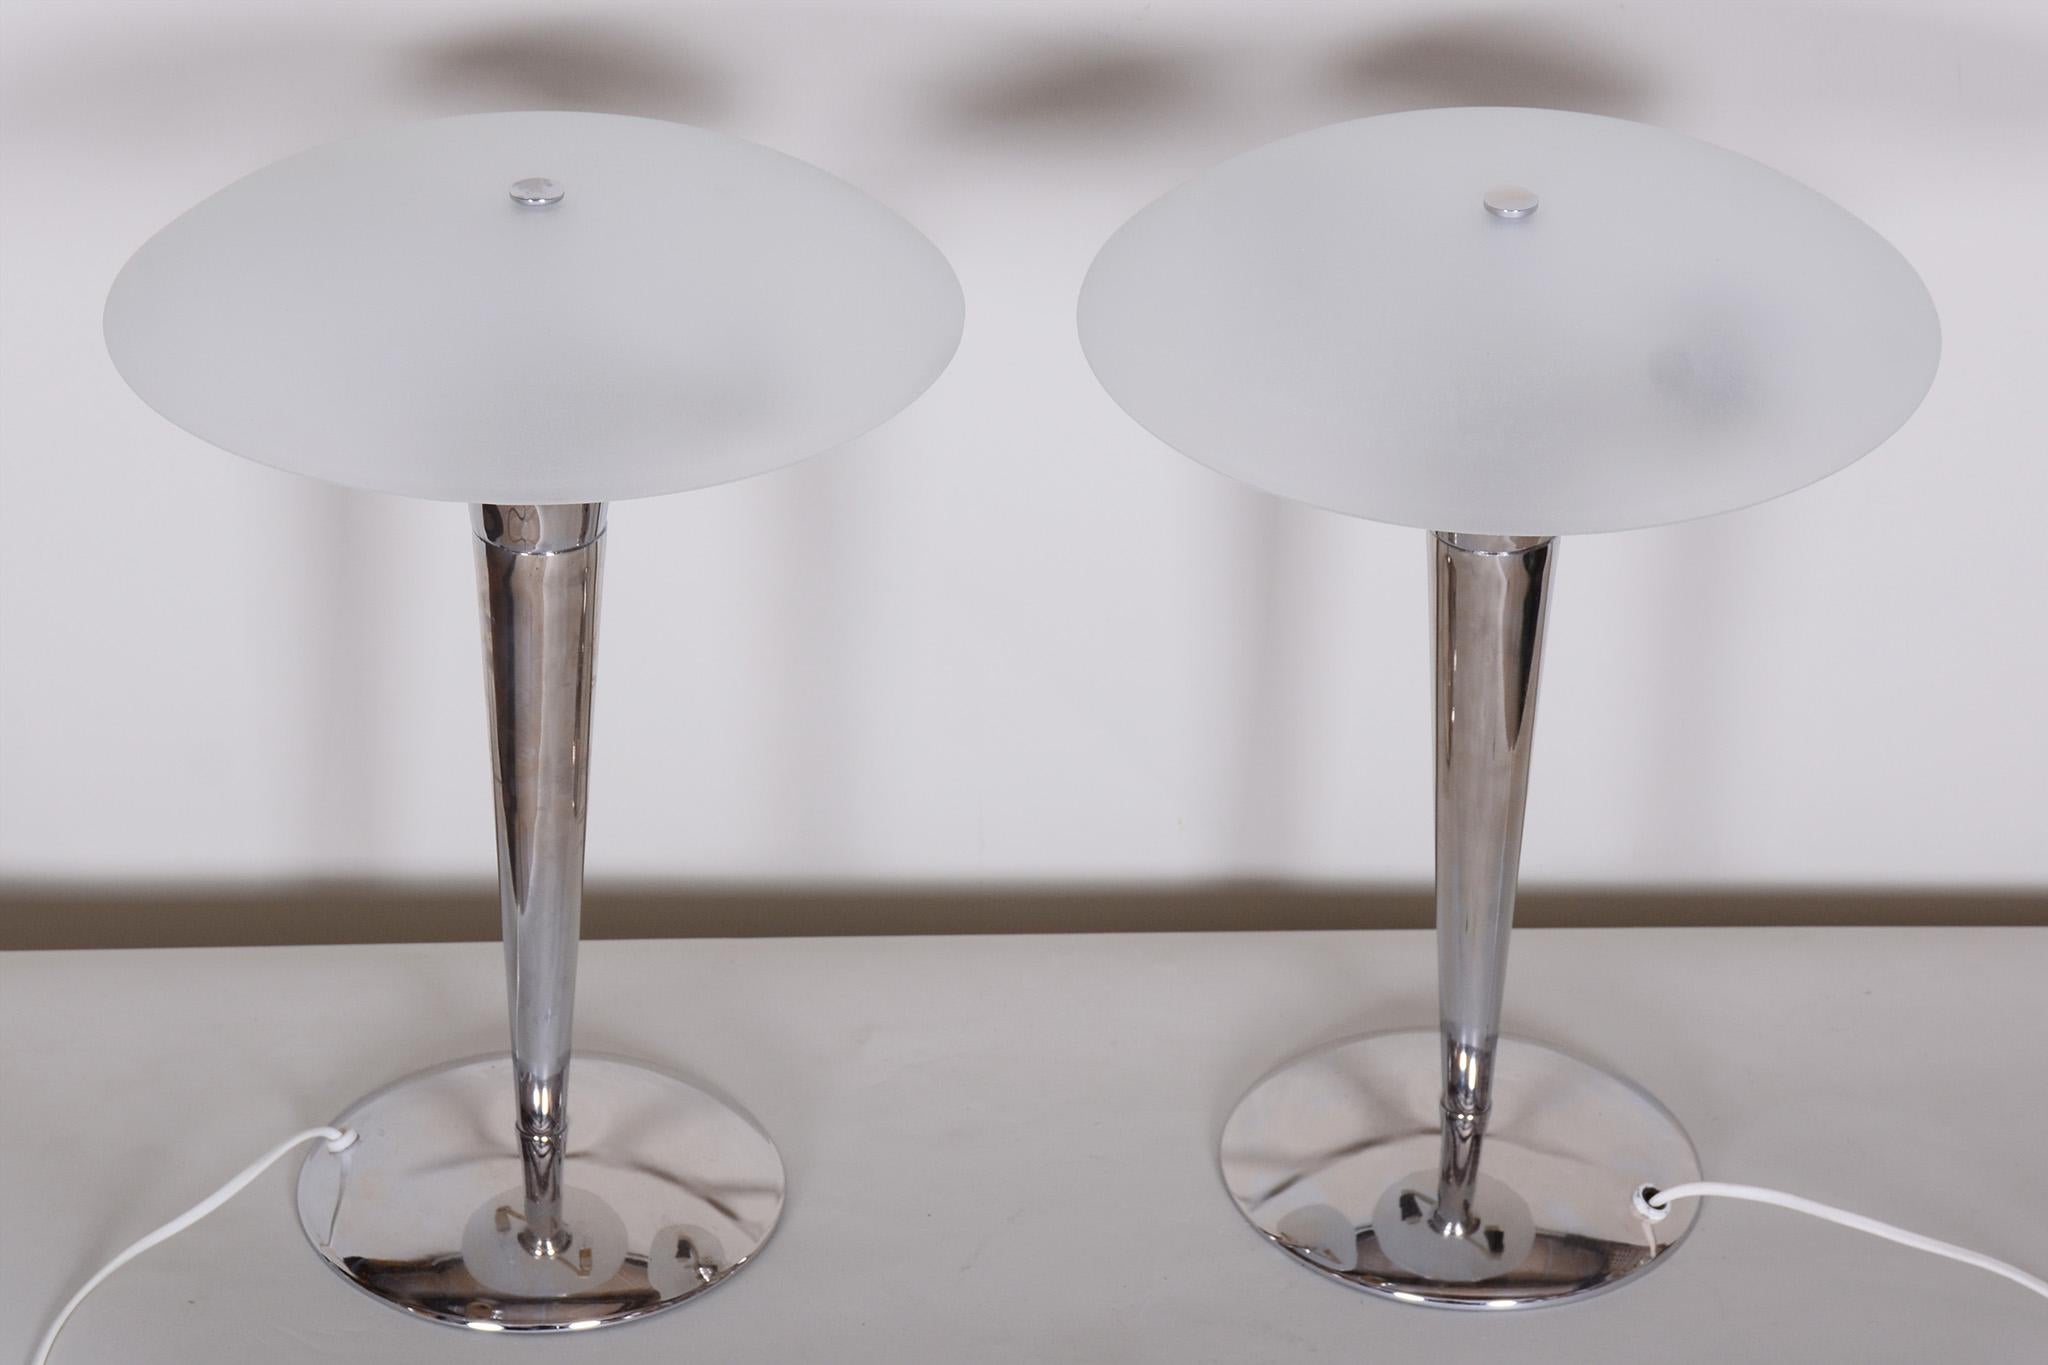 Pair of Midcentury Table Lamps, Chrome-Plated Steel, Milk Glass, Germany, 1950s For Sale 3